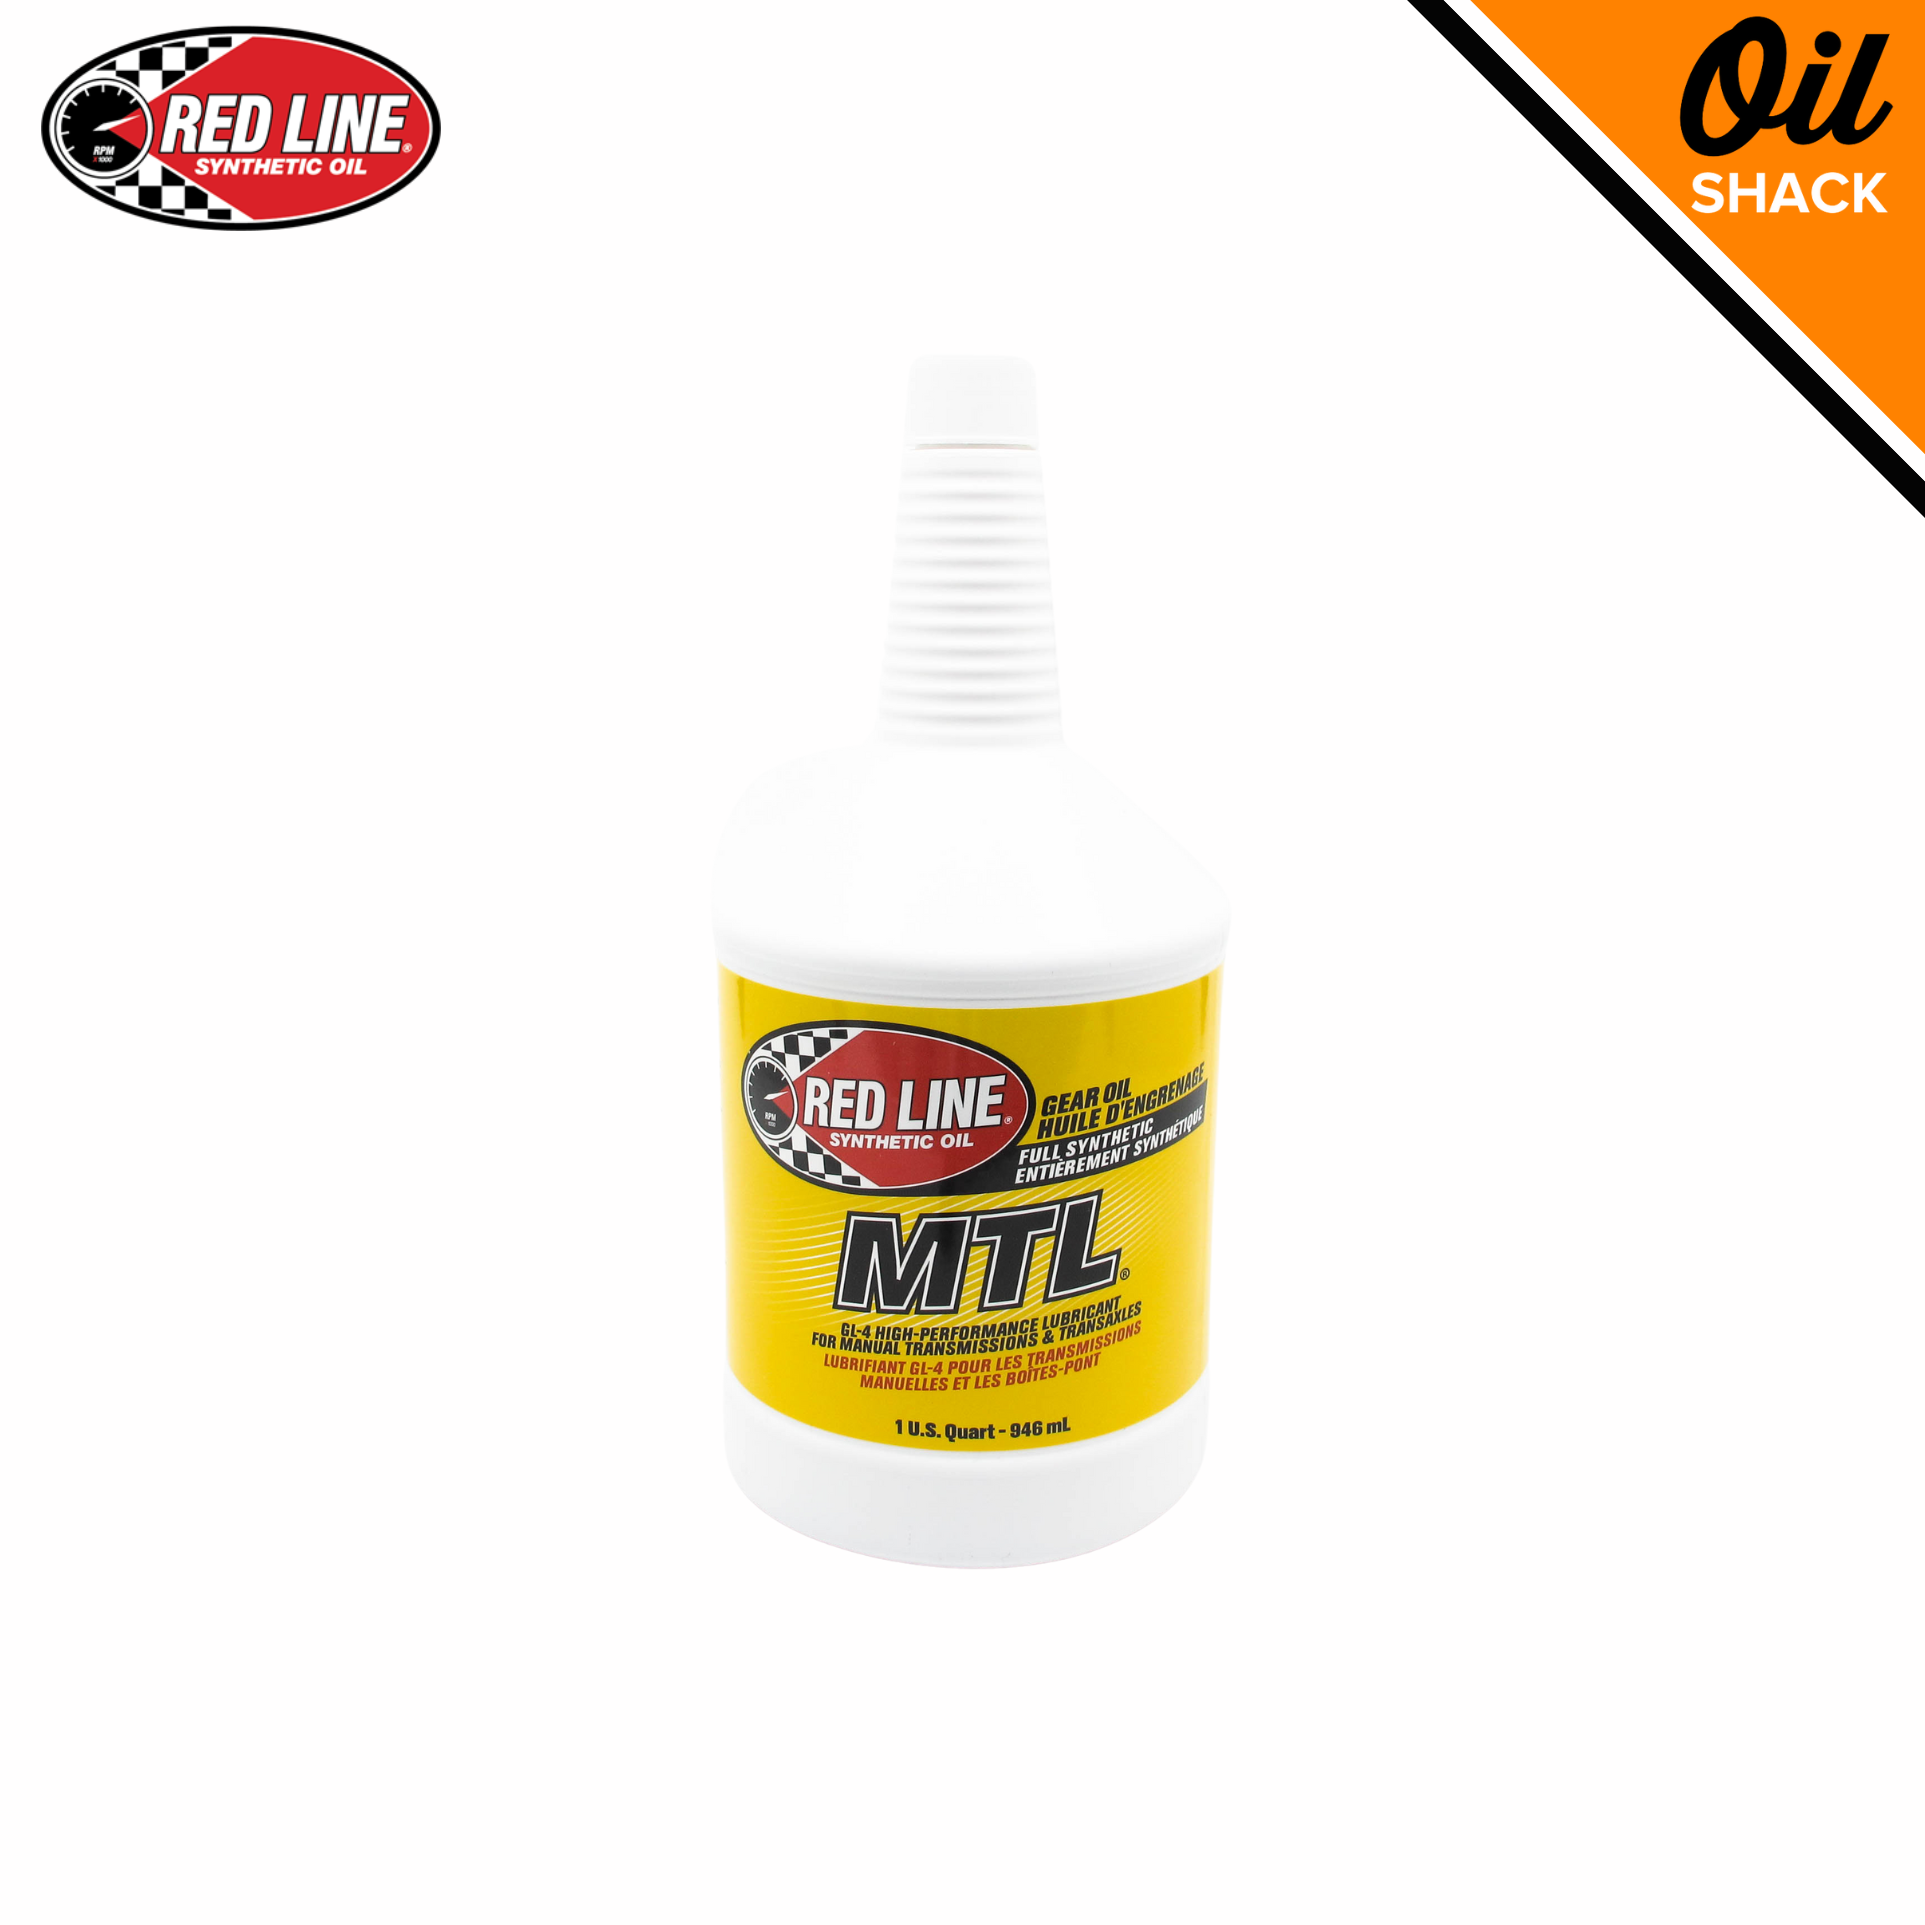 RED LINE MTL Full Synthetic Manual Transmission Gear Oil 75w-80